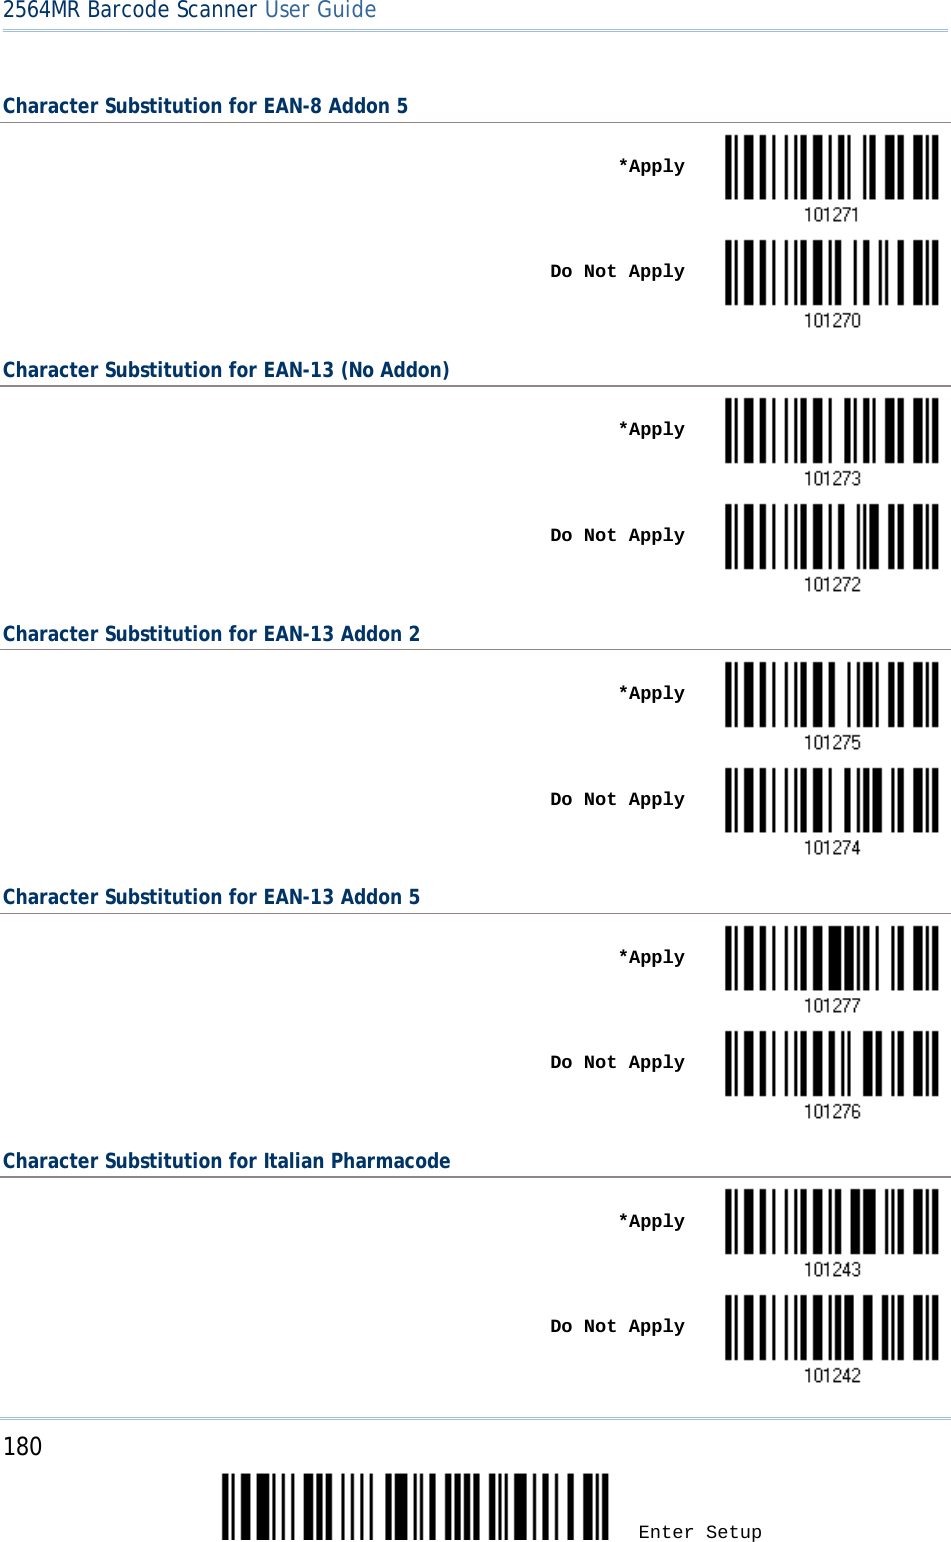 2564MR Barcode Scanner User Guide  Character Substitution for EAN-8 Addon 5    *Apply     Do Not Apply  Character Substitution for EAN-13 (No Addon)    *Apply     Do Not Apply  Character Substitution for EAN-13 Addon 2    *Apply     Do Not Apply  Character Substitution for EAN-13 Addon 5    *Apply     Do Not Apply  Character Substitution for Italian Pharmacode    *Apply     Do Not Apply  180 Enter Setup 